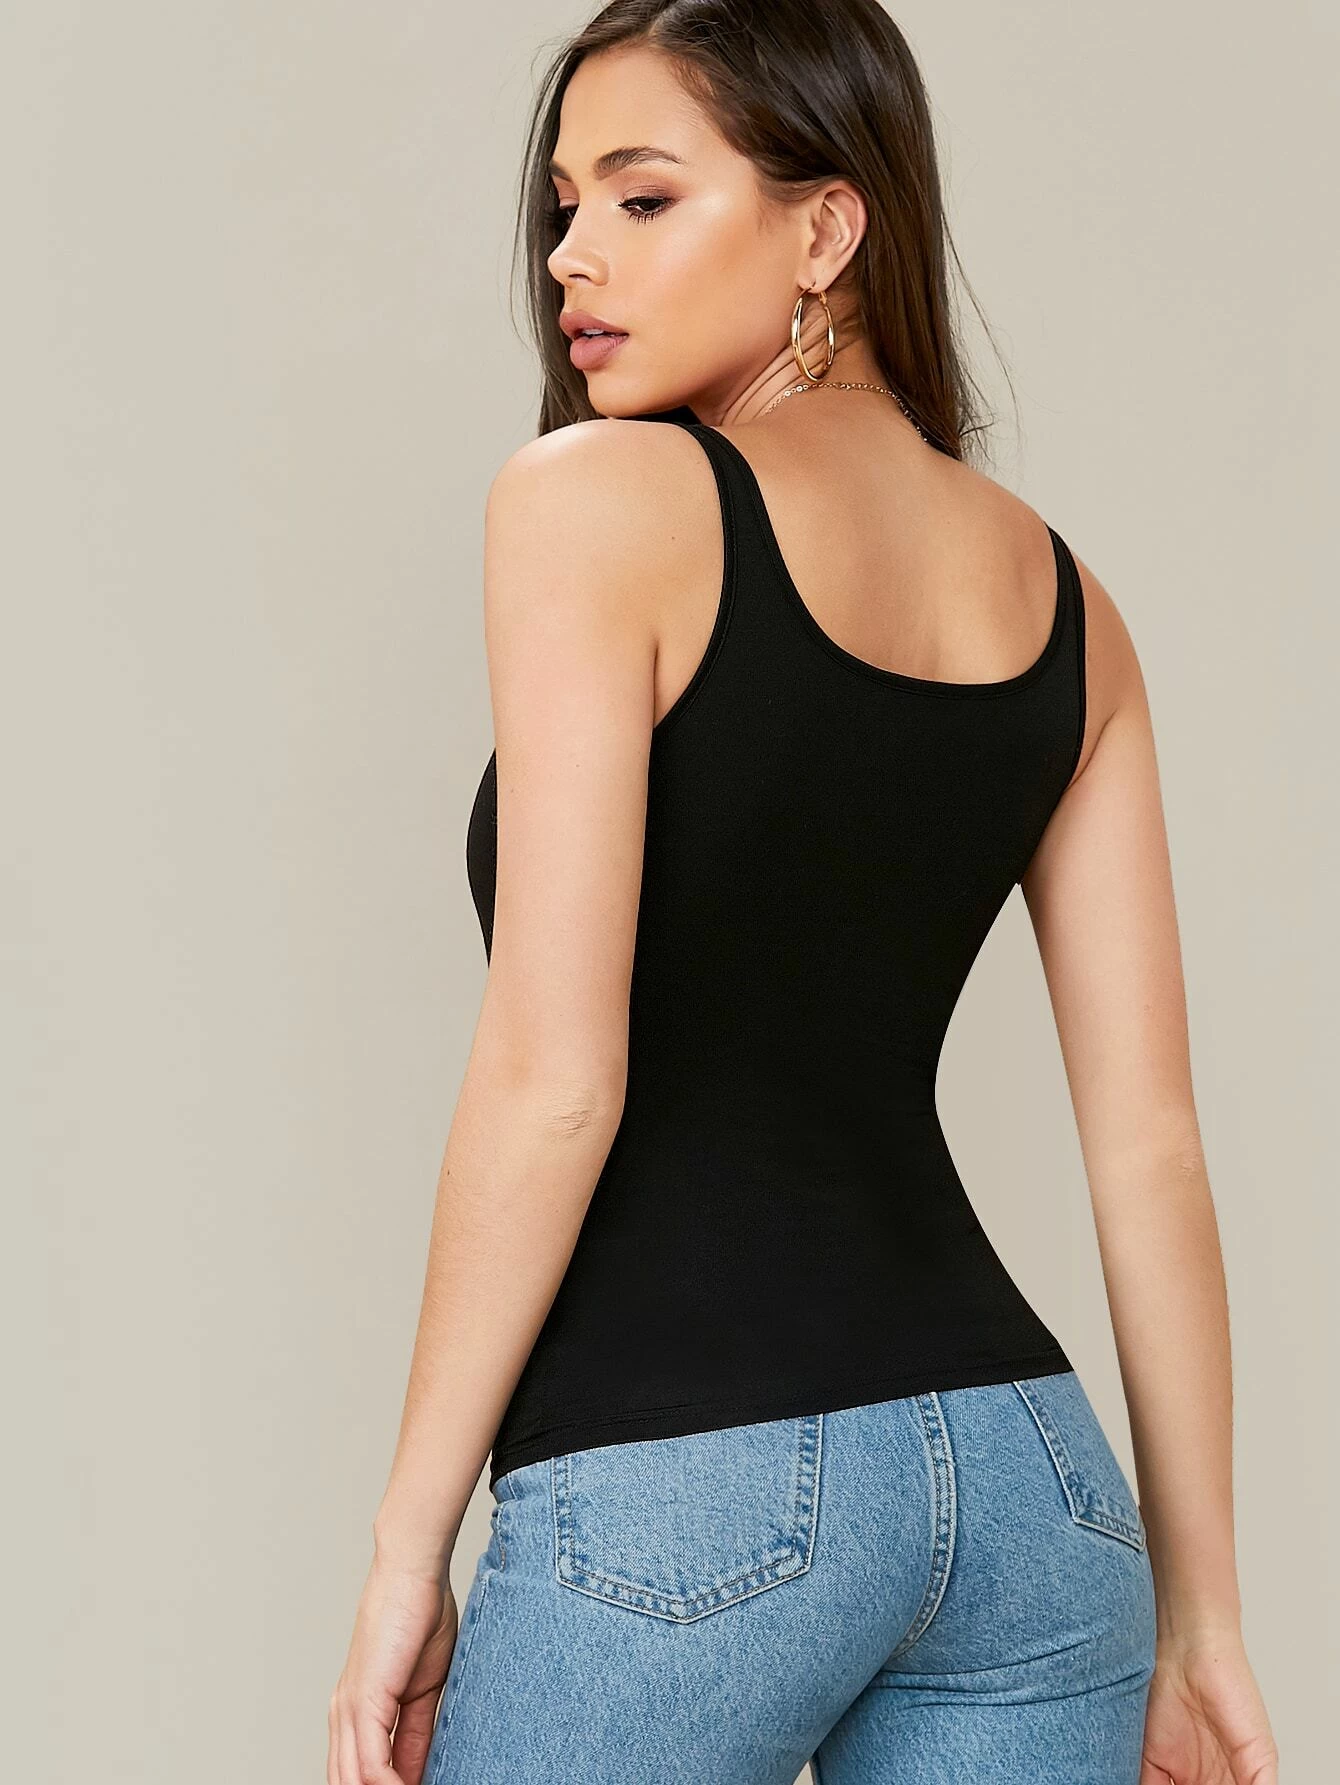 Form fitting black tank top – Styched Fashion